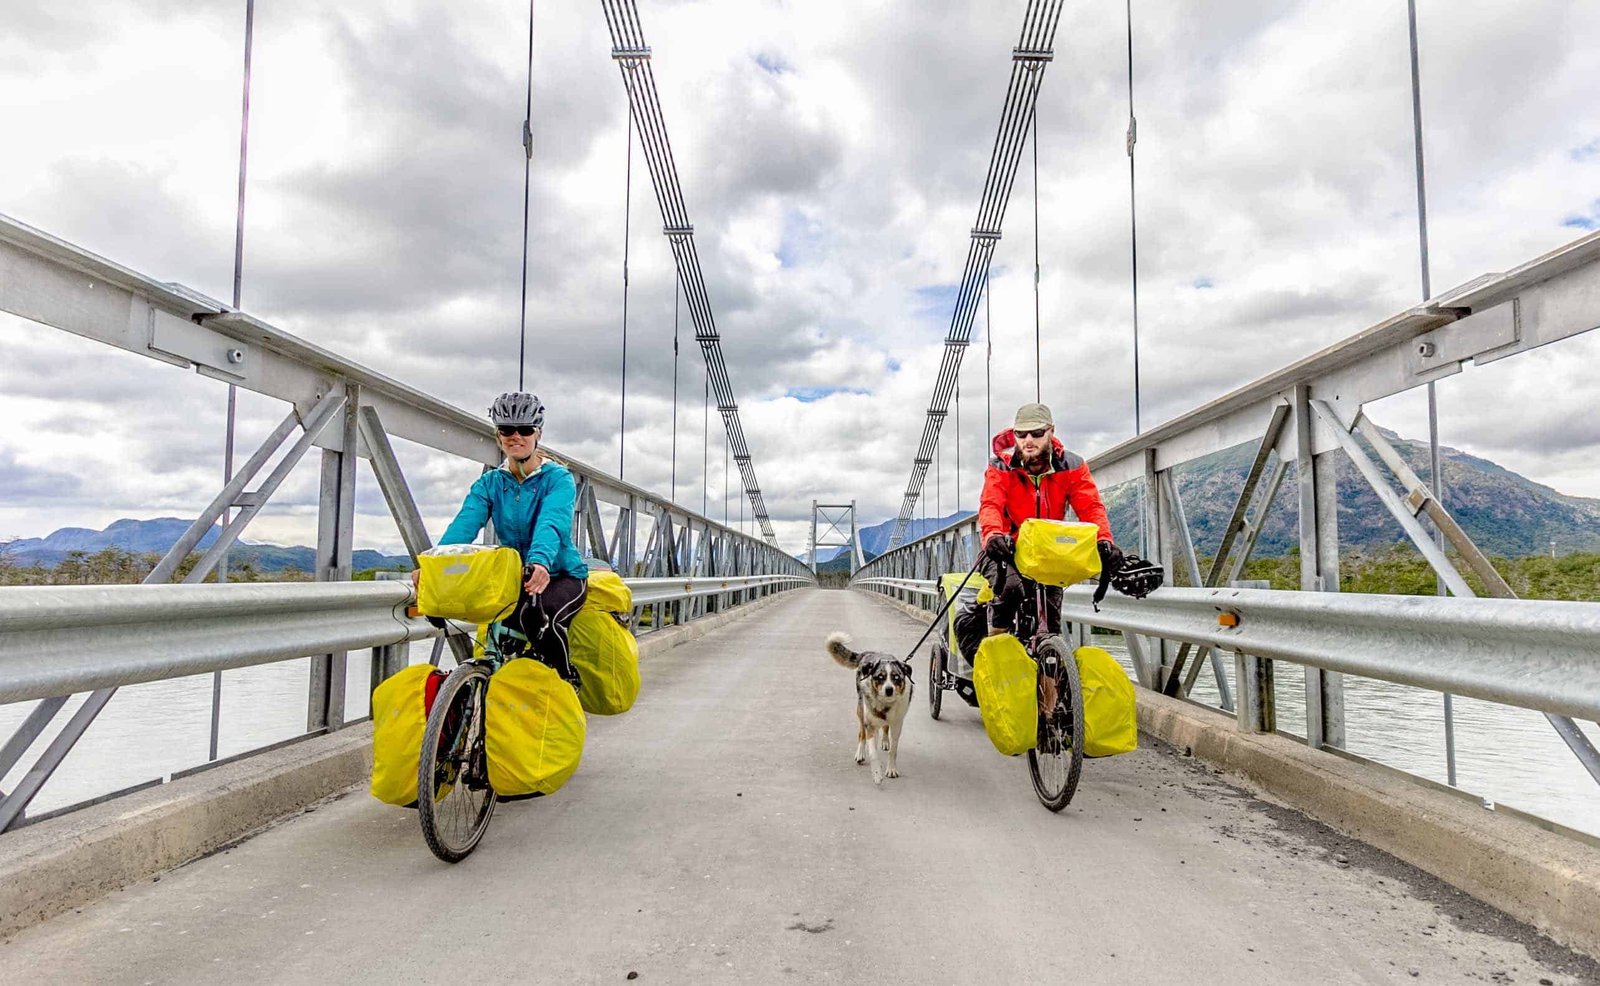 Two people on bicycles with a dog walking between them